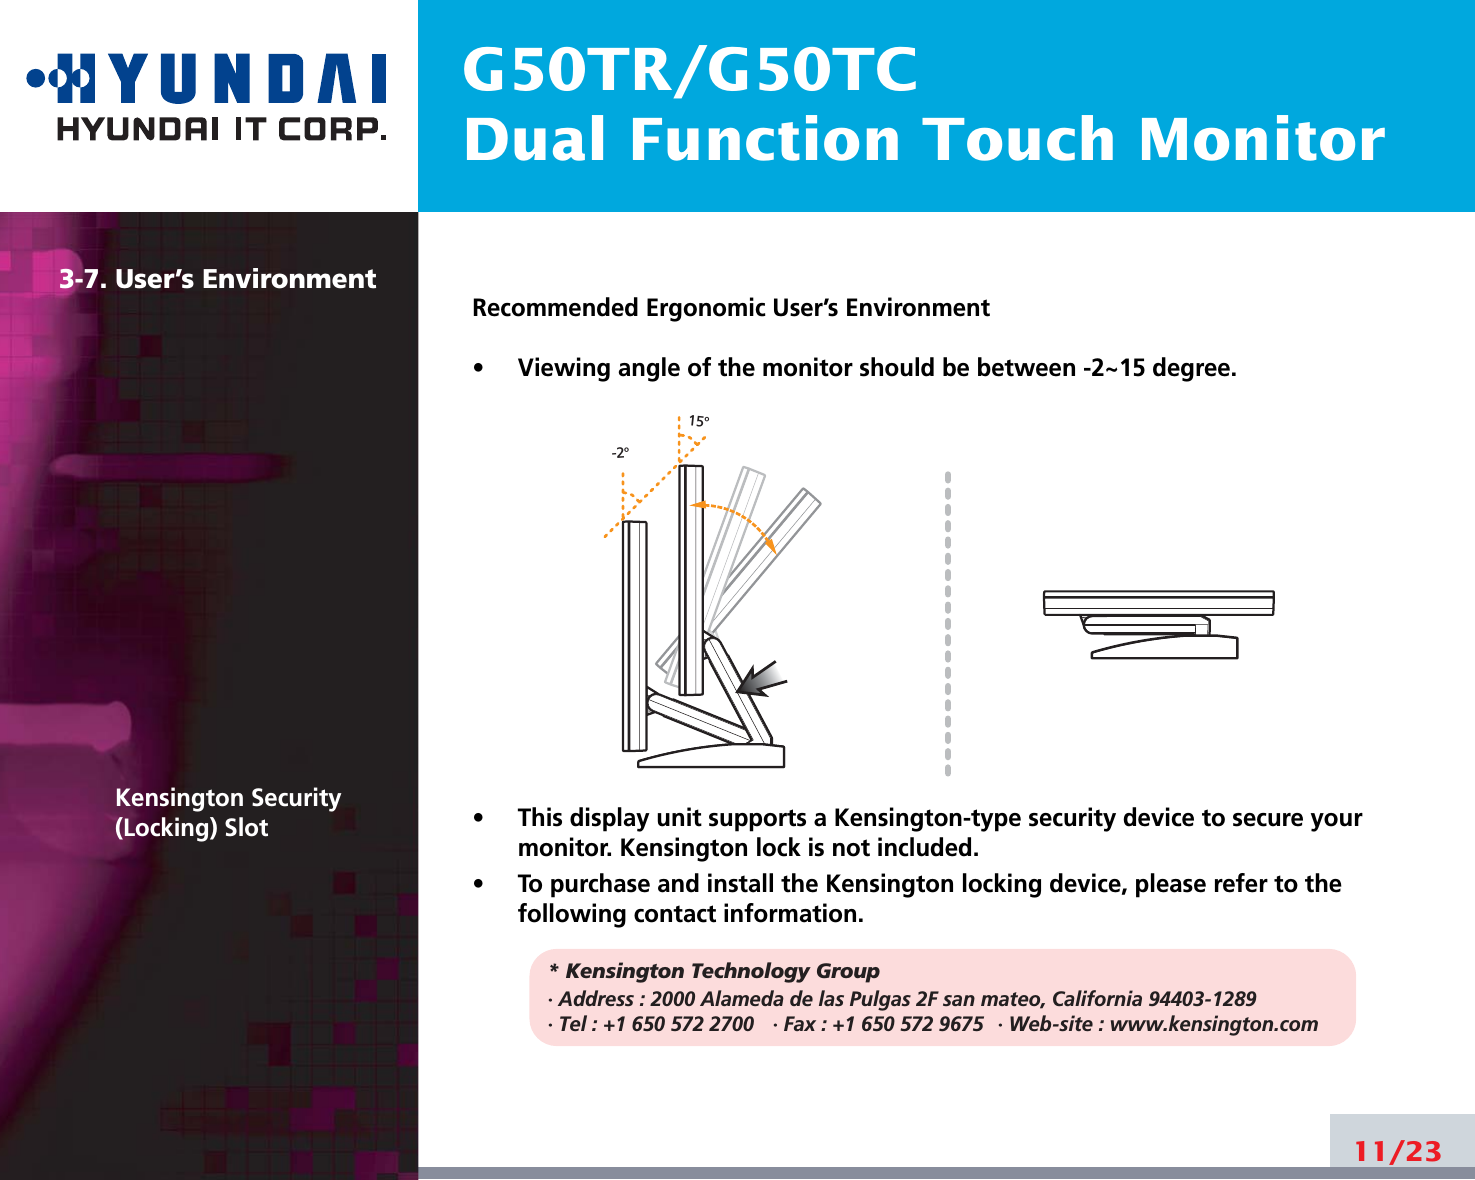 G50TR/G50TCDual Function Touch Monitor3-7. User’s EnvironmentKensington Security(Locking) SlotRecommended Ergonomic User’s Environment•     Viewing angle of the monitor should be between -2~15 degree.•     This display unit supports a Kensington-type security device to secure yourmonitor. Kensington lock is not included.•     To purchase and install the Kensington locking device, please refer to thefollowing contact information.* Kensington Technology Group· Address : 2000 Alameda de las Pulgas 2F san mateo, California 94403-1289· Tel : +1 650 572 2700 · Fax : +1 650 572 9675 · Web-site : www.kensington.com11/2315o-2o